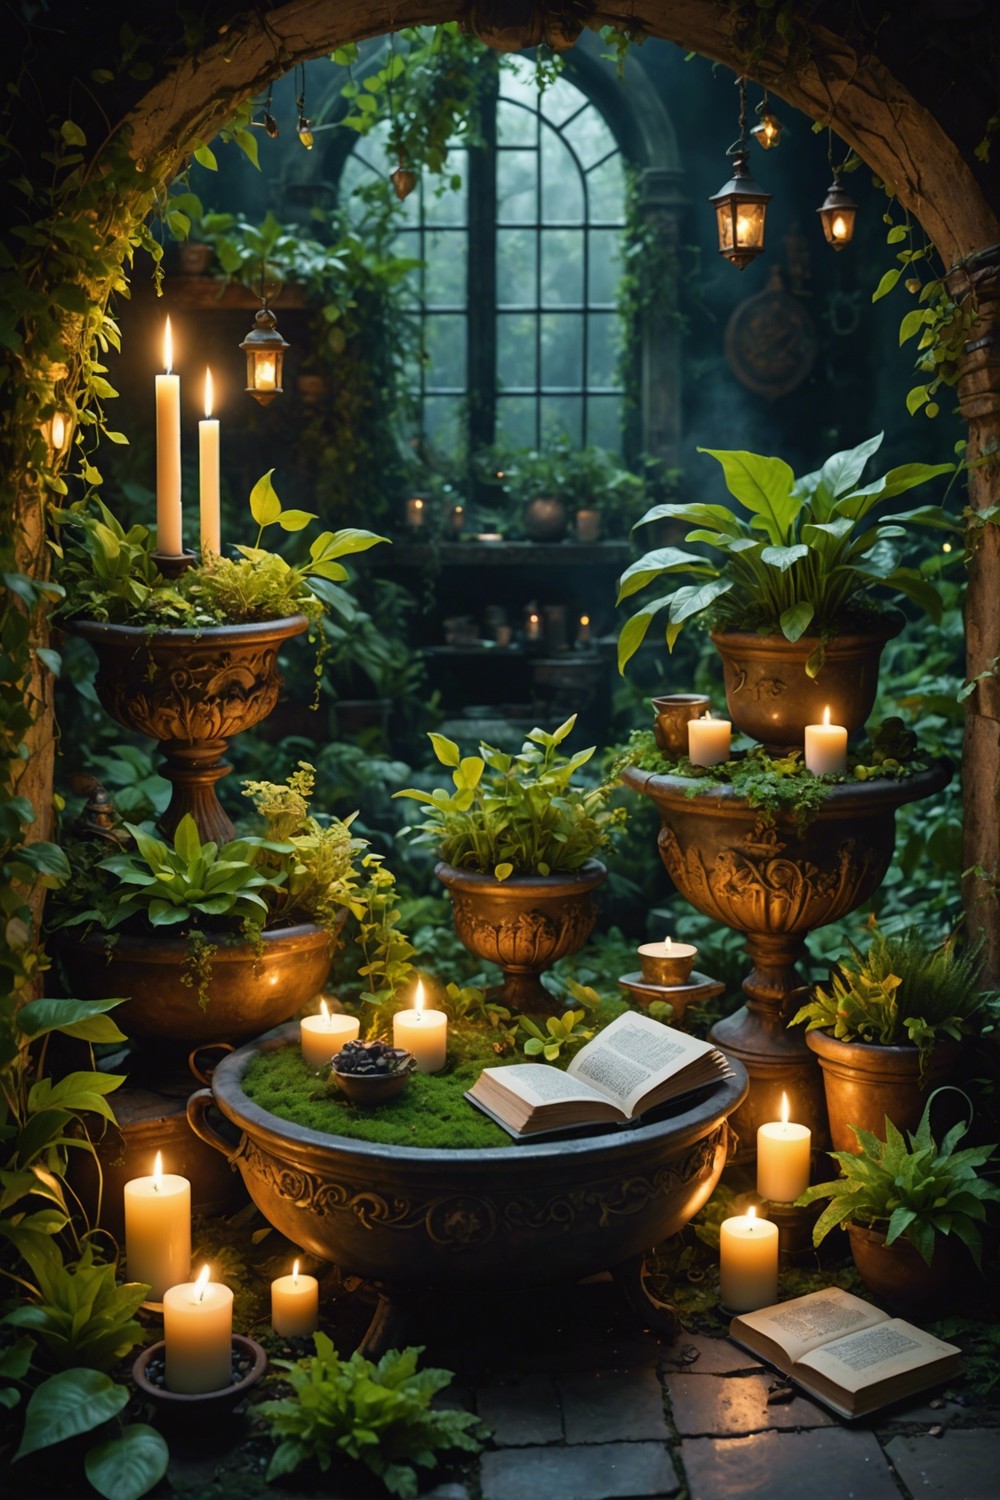 The Witch's Apothecary Garden